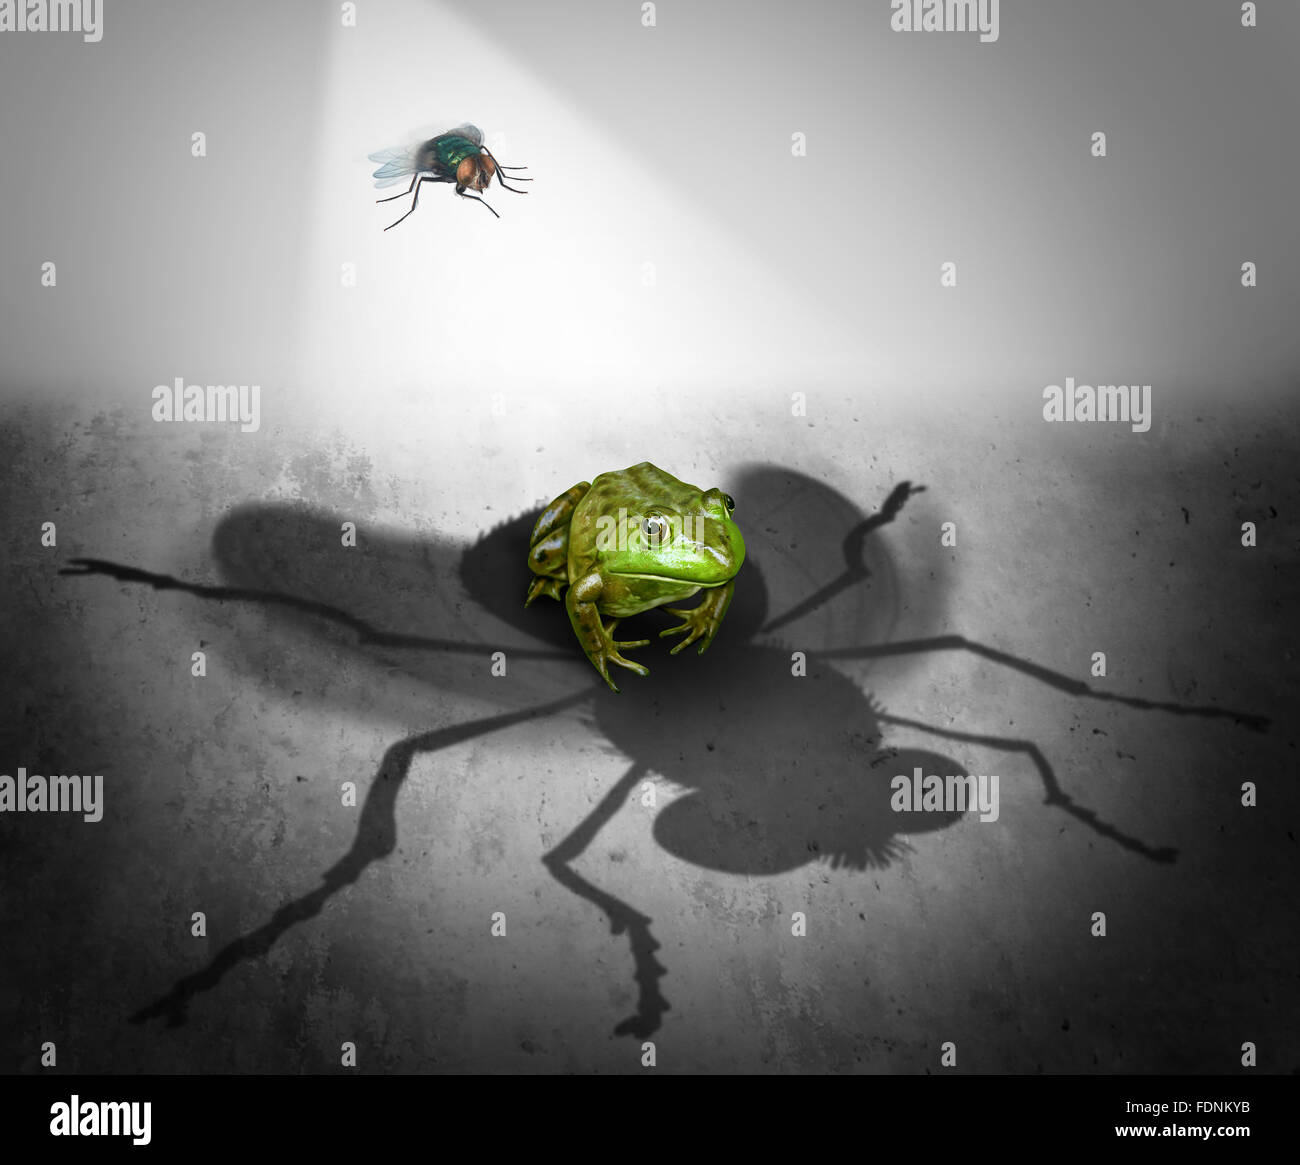 Perception and reality as the giant cast shadow of a small bug falling on a fearful frog as a psychological metaphor for false impression or delusion and misconception symbol. Stock Photo